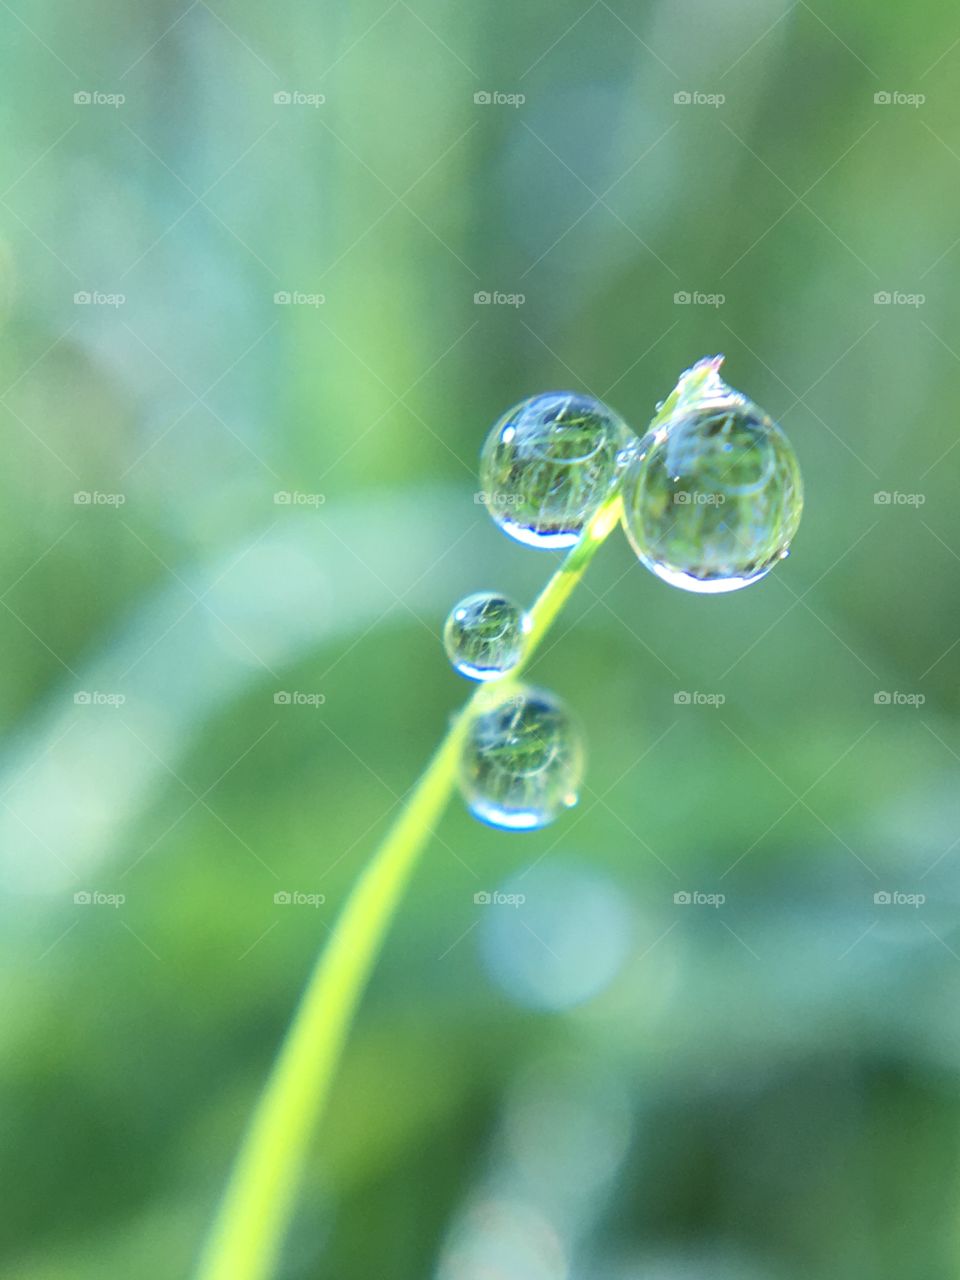 Droplets on Grass